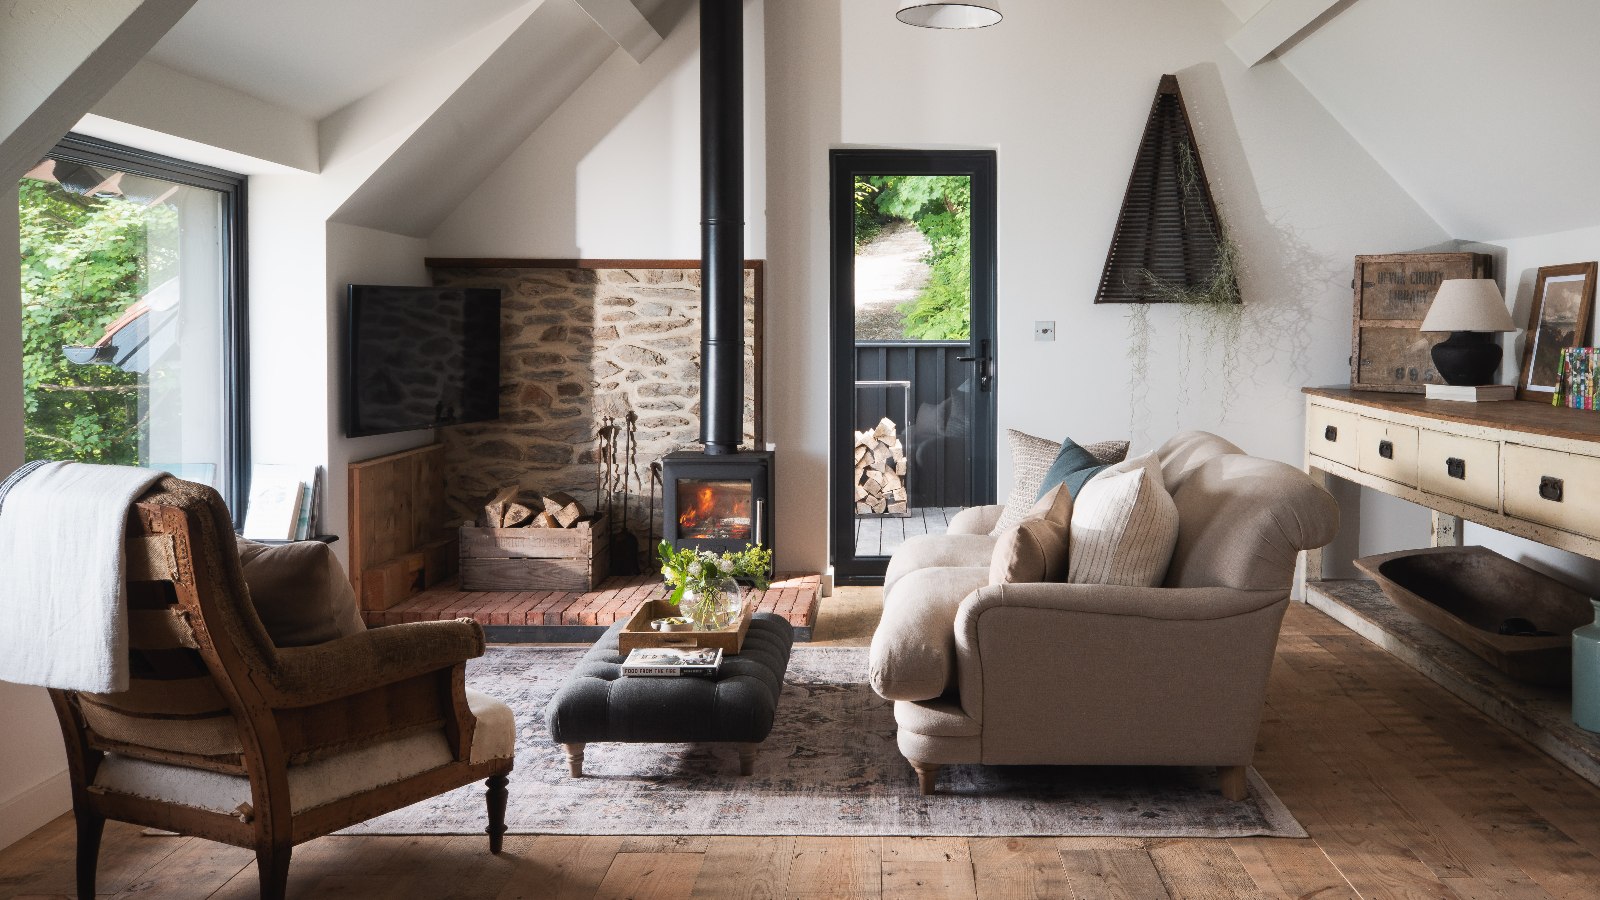 Rockton Mews living space with wood burner